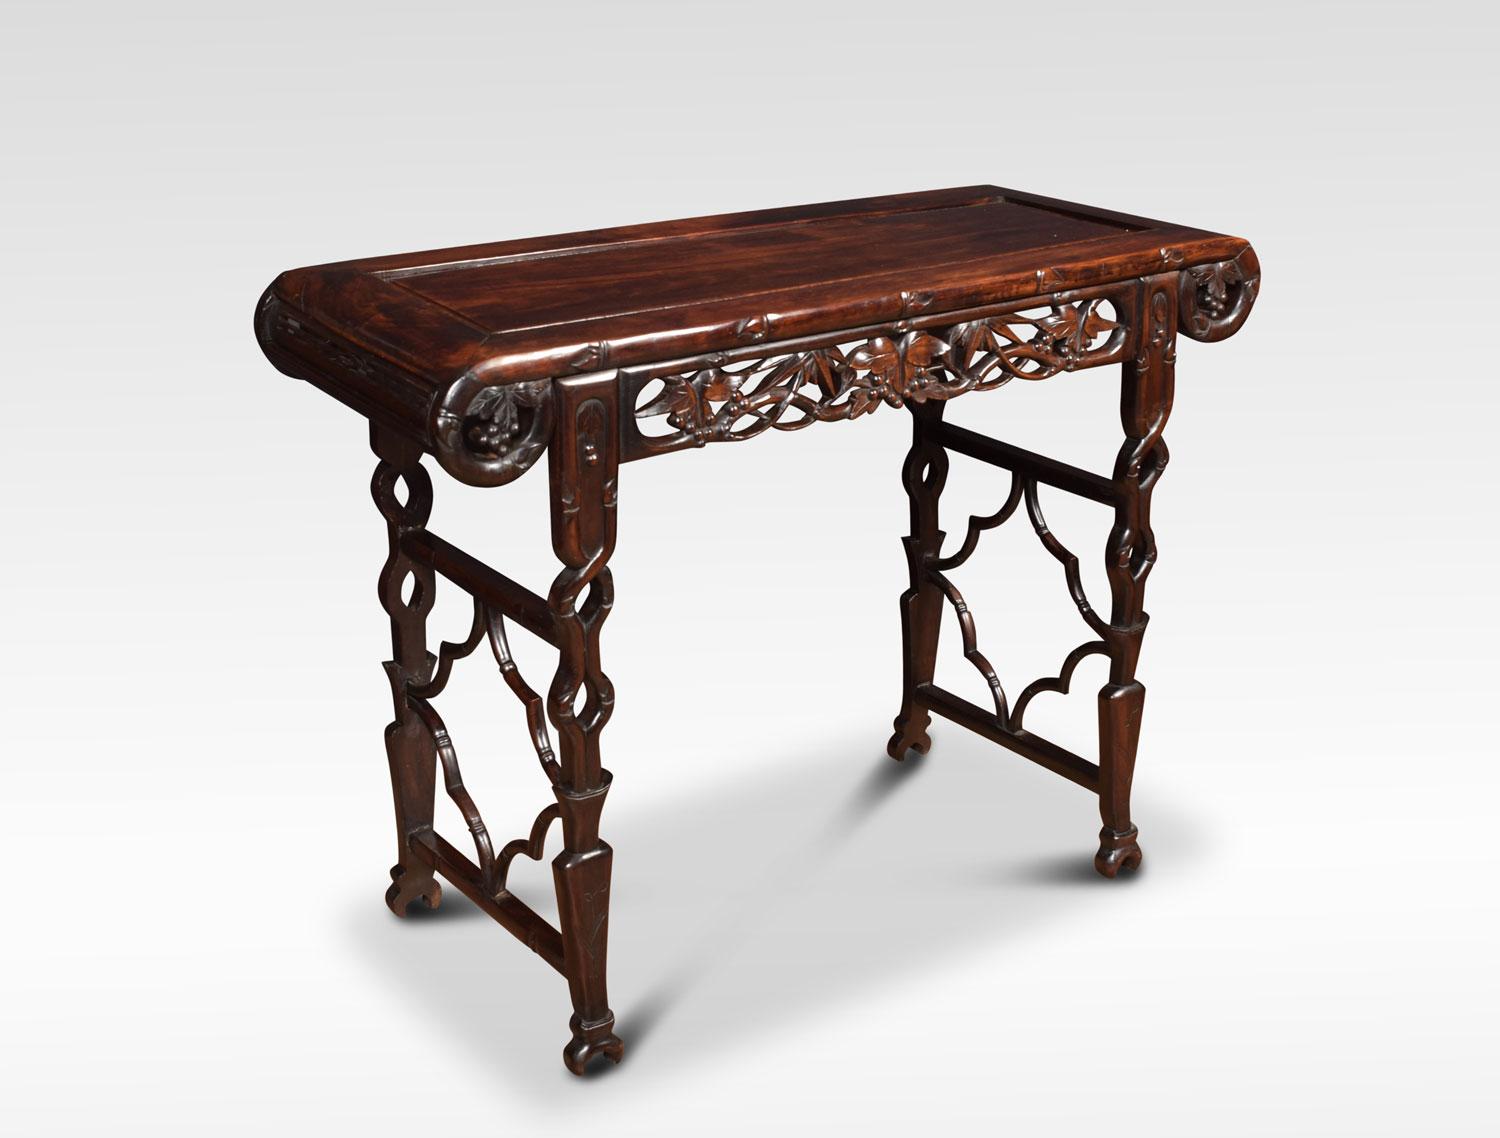 Chinese carved alter table, the large rectangular inset panel top and curved ends above naturalistic scroll carved foliated frieze raised up on carved cross stretcher supports.
Dimensions:
Height 30.5 inches
Width 41 inches
Depth 17 inches.